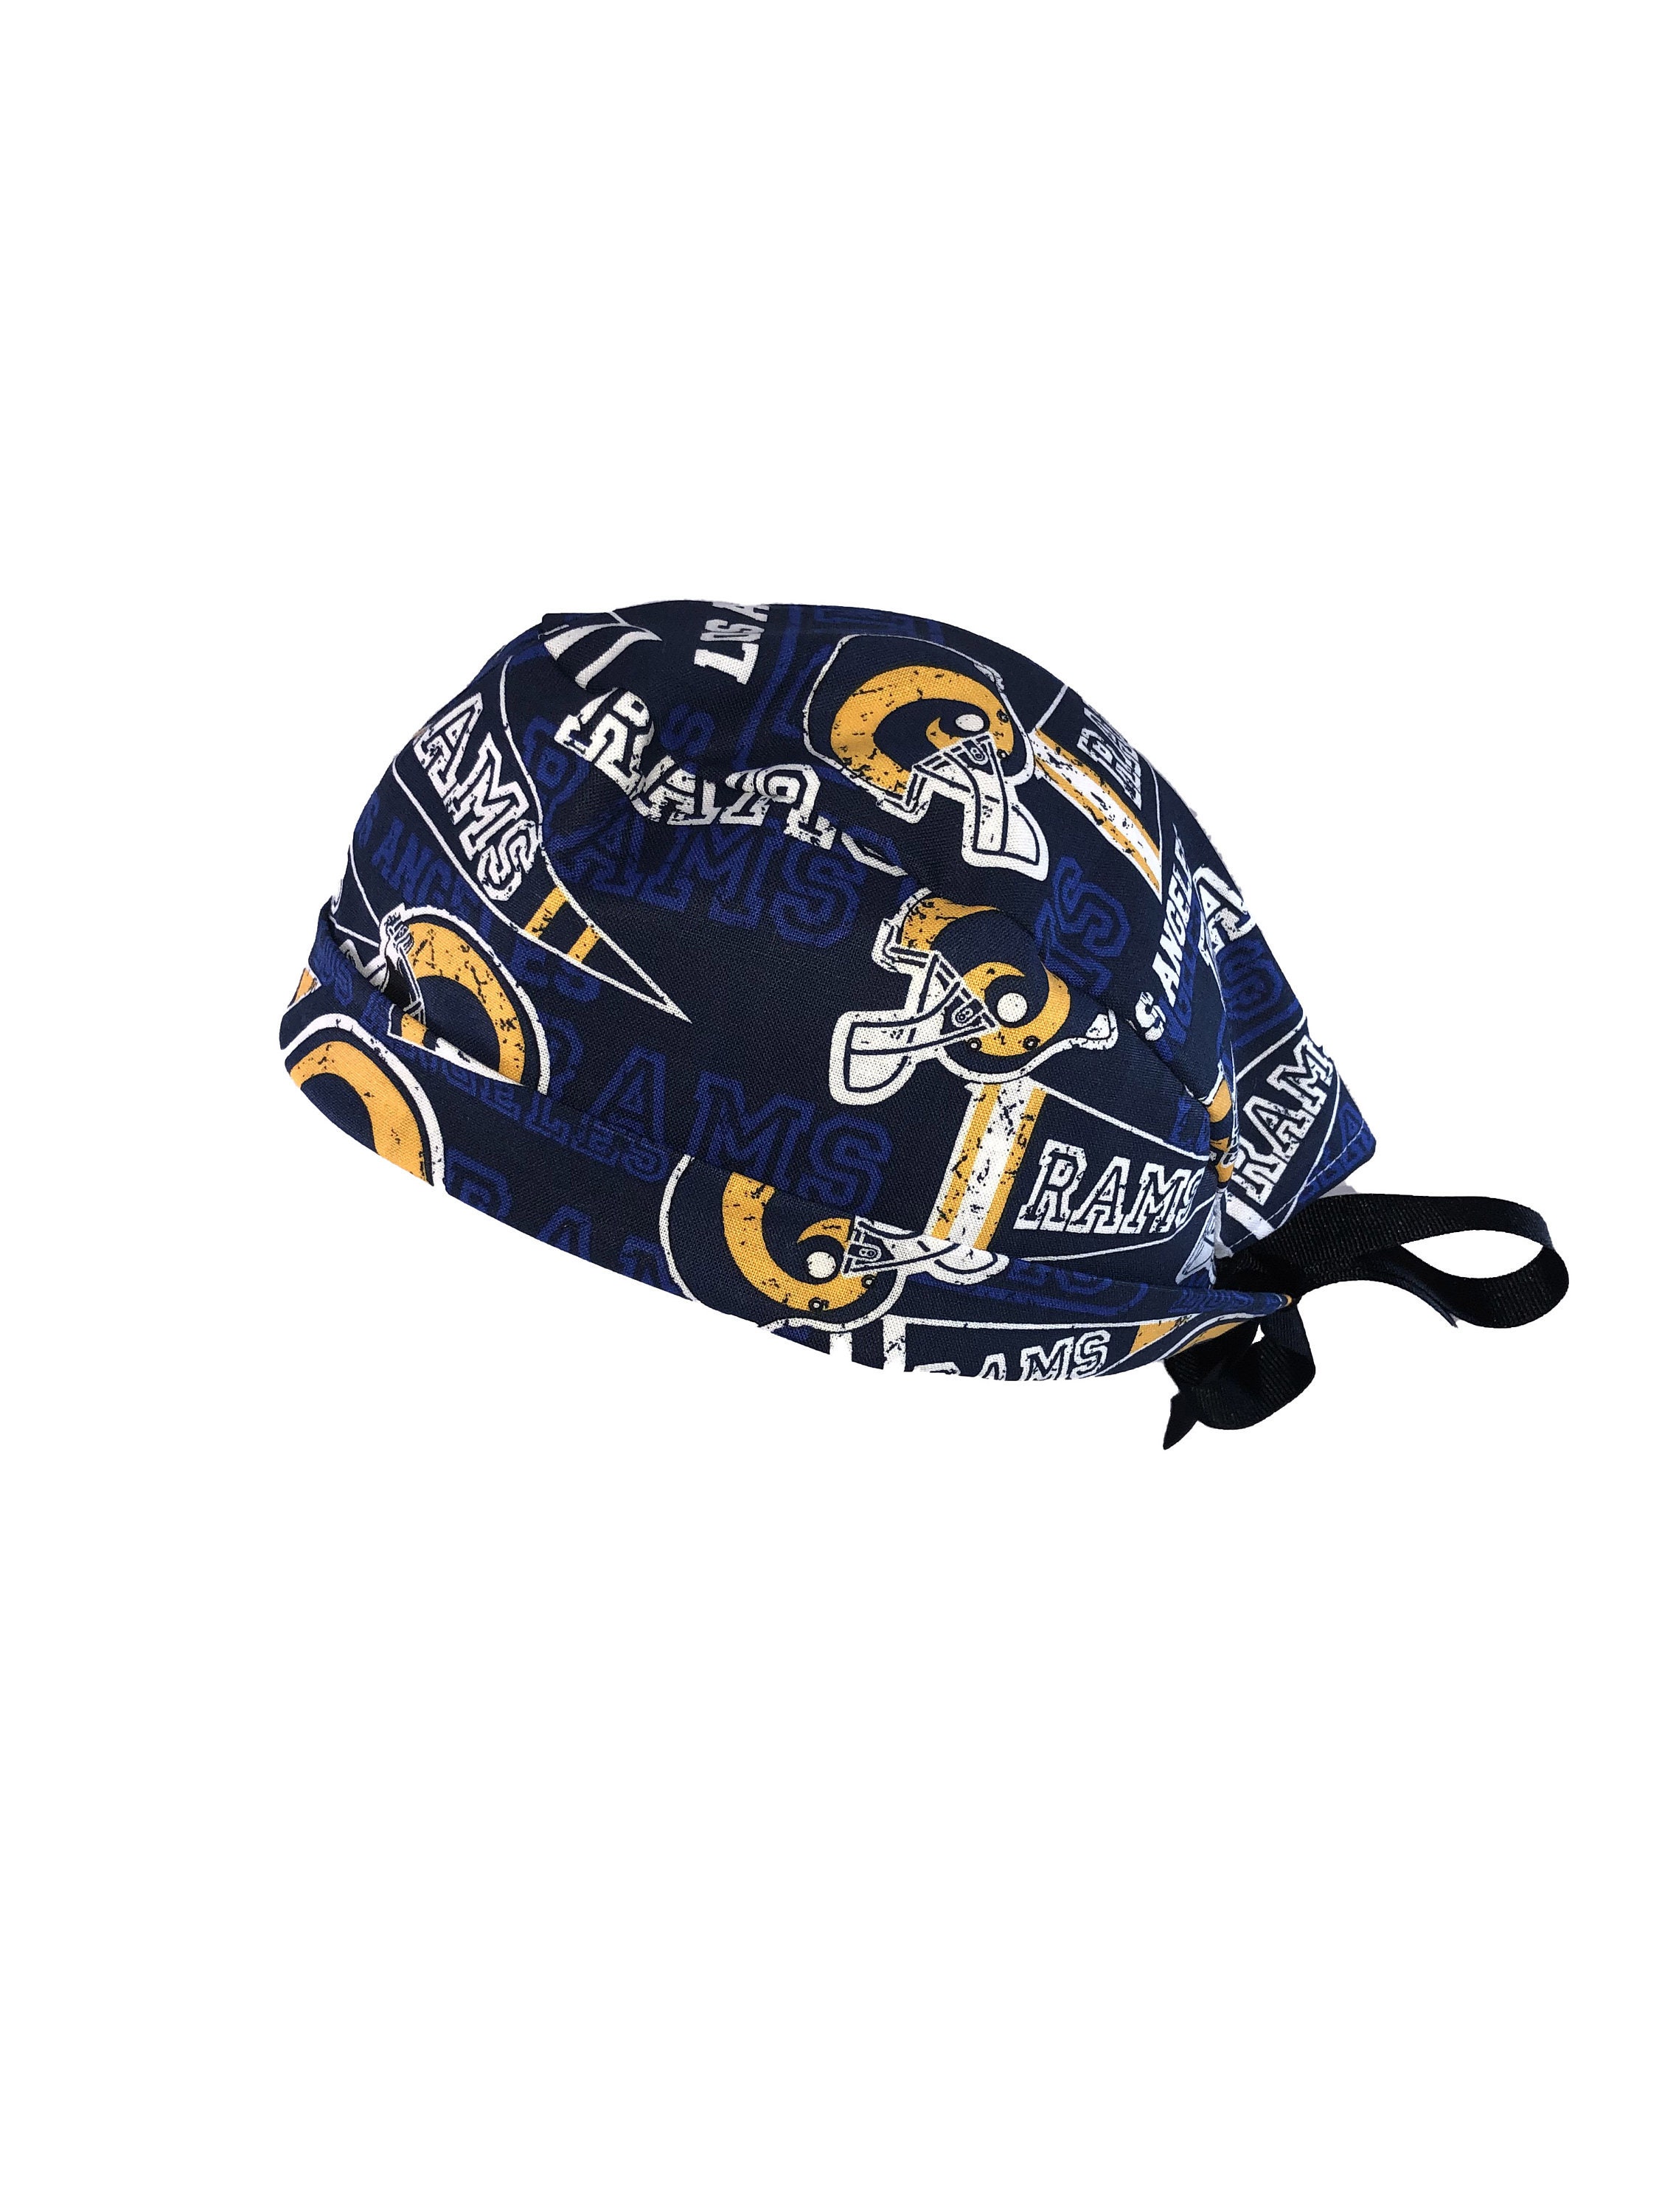 La Rams Retro Nfl Tie Back Scrub Cap, Nurse Hat With Or Without Ponytail Holder